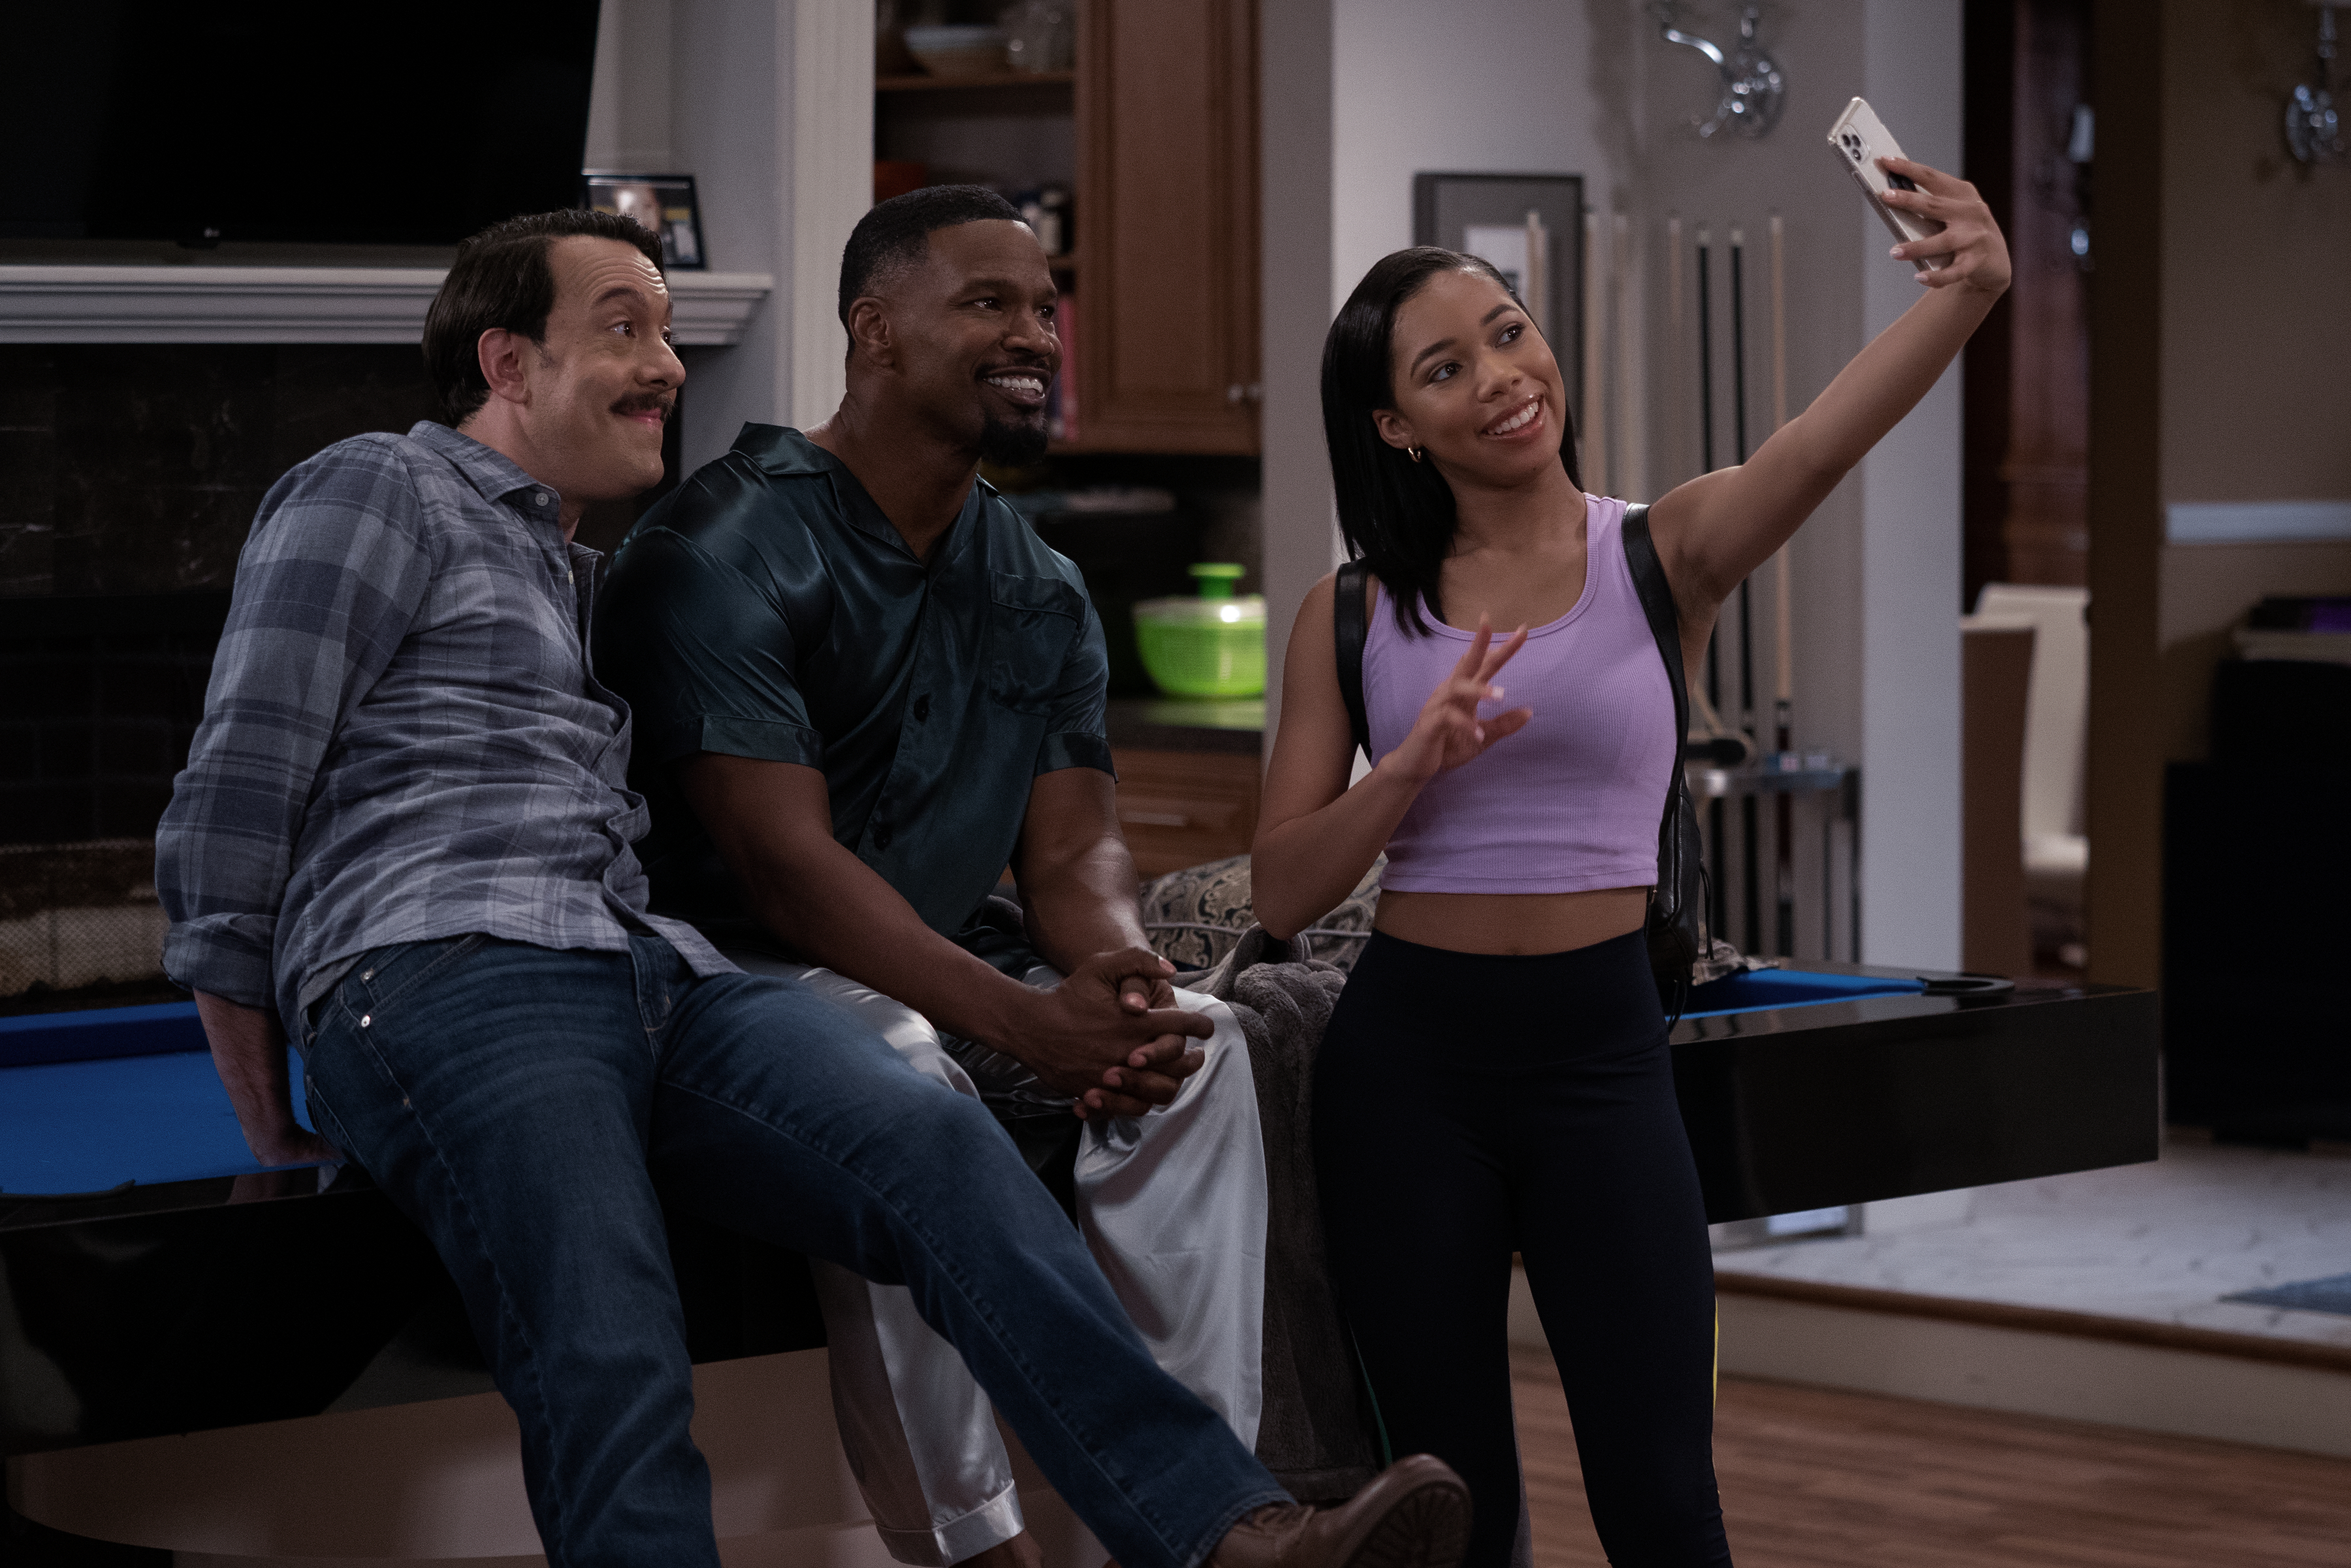 Jonathan Kite, Jamie Foxx, and Kyla-Drew take a selfie in an episode of Dad Stop Embarrassing Me!